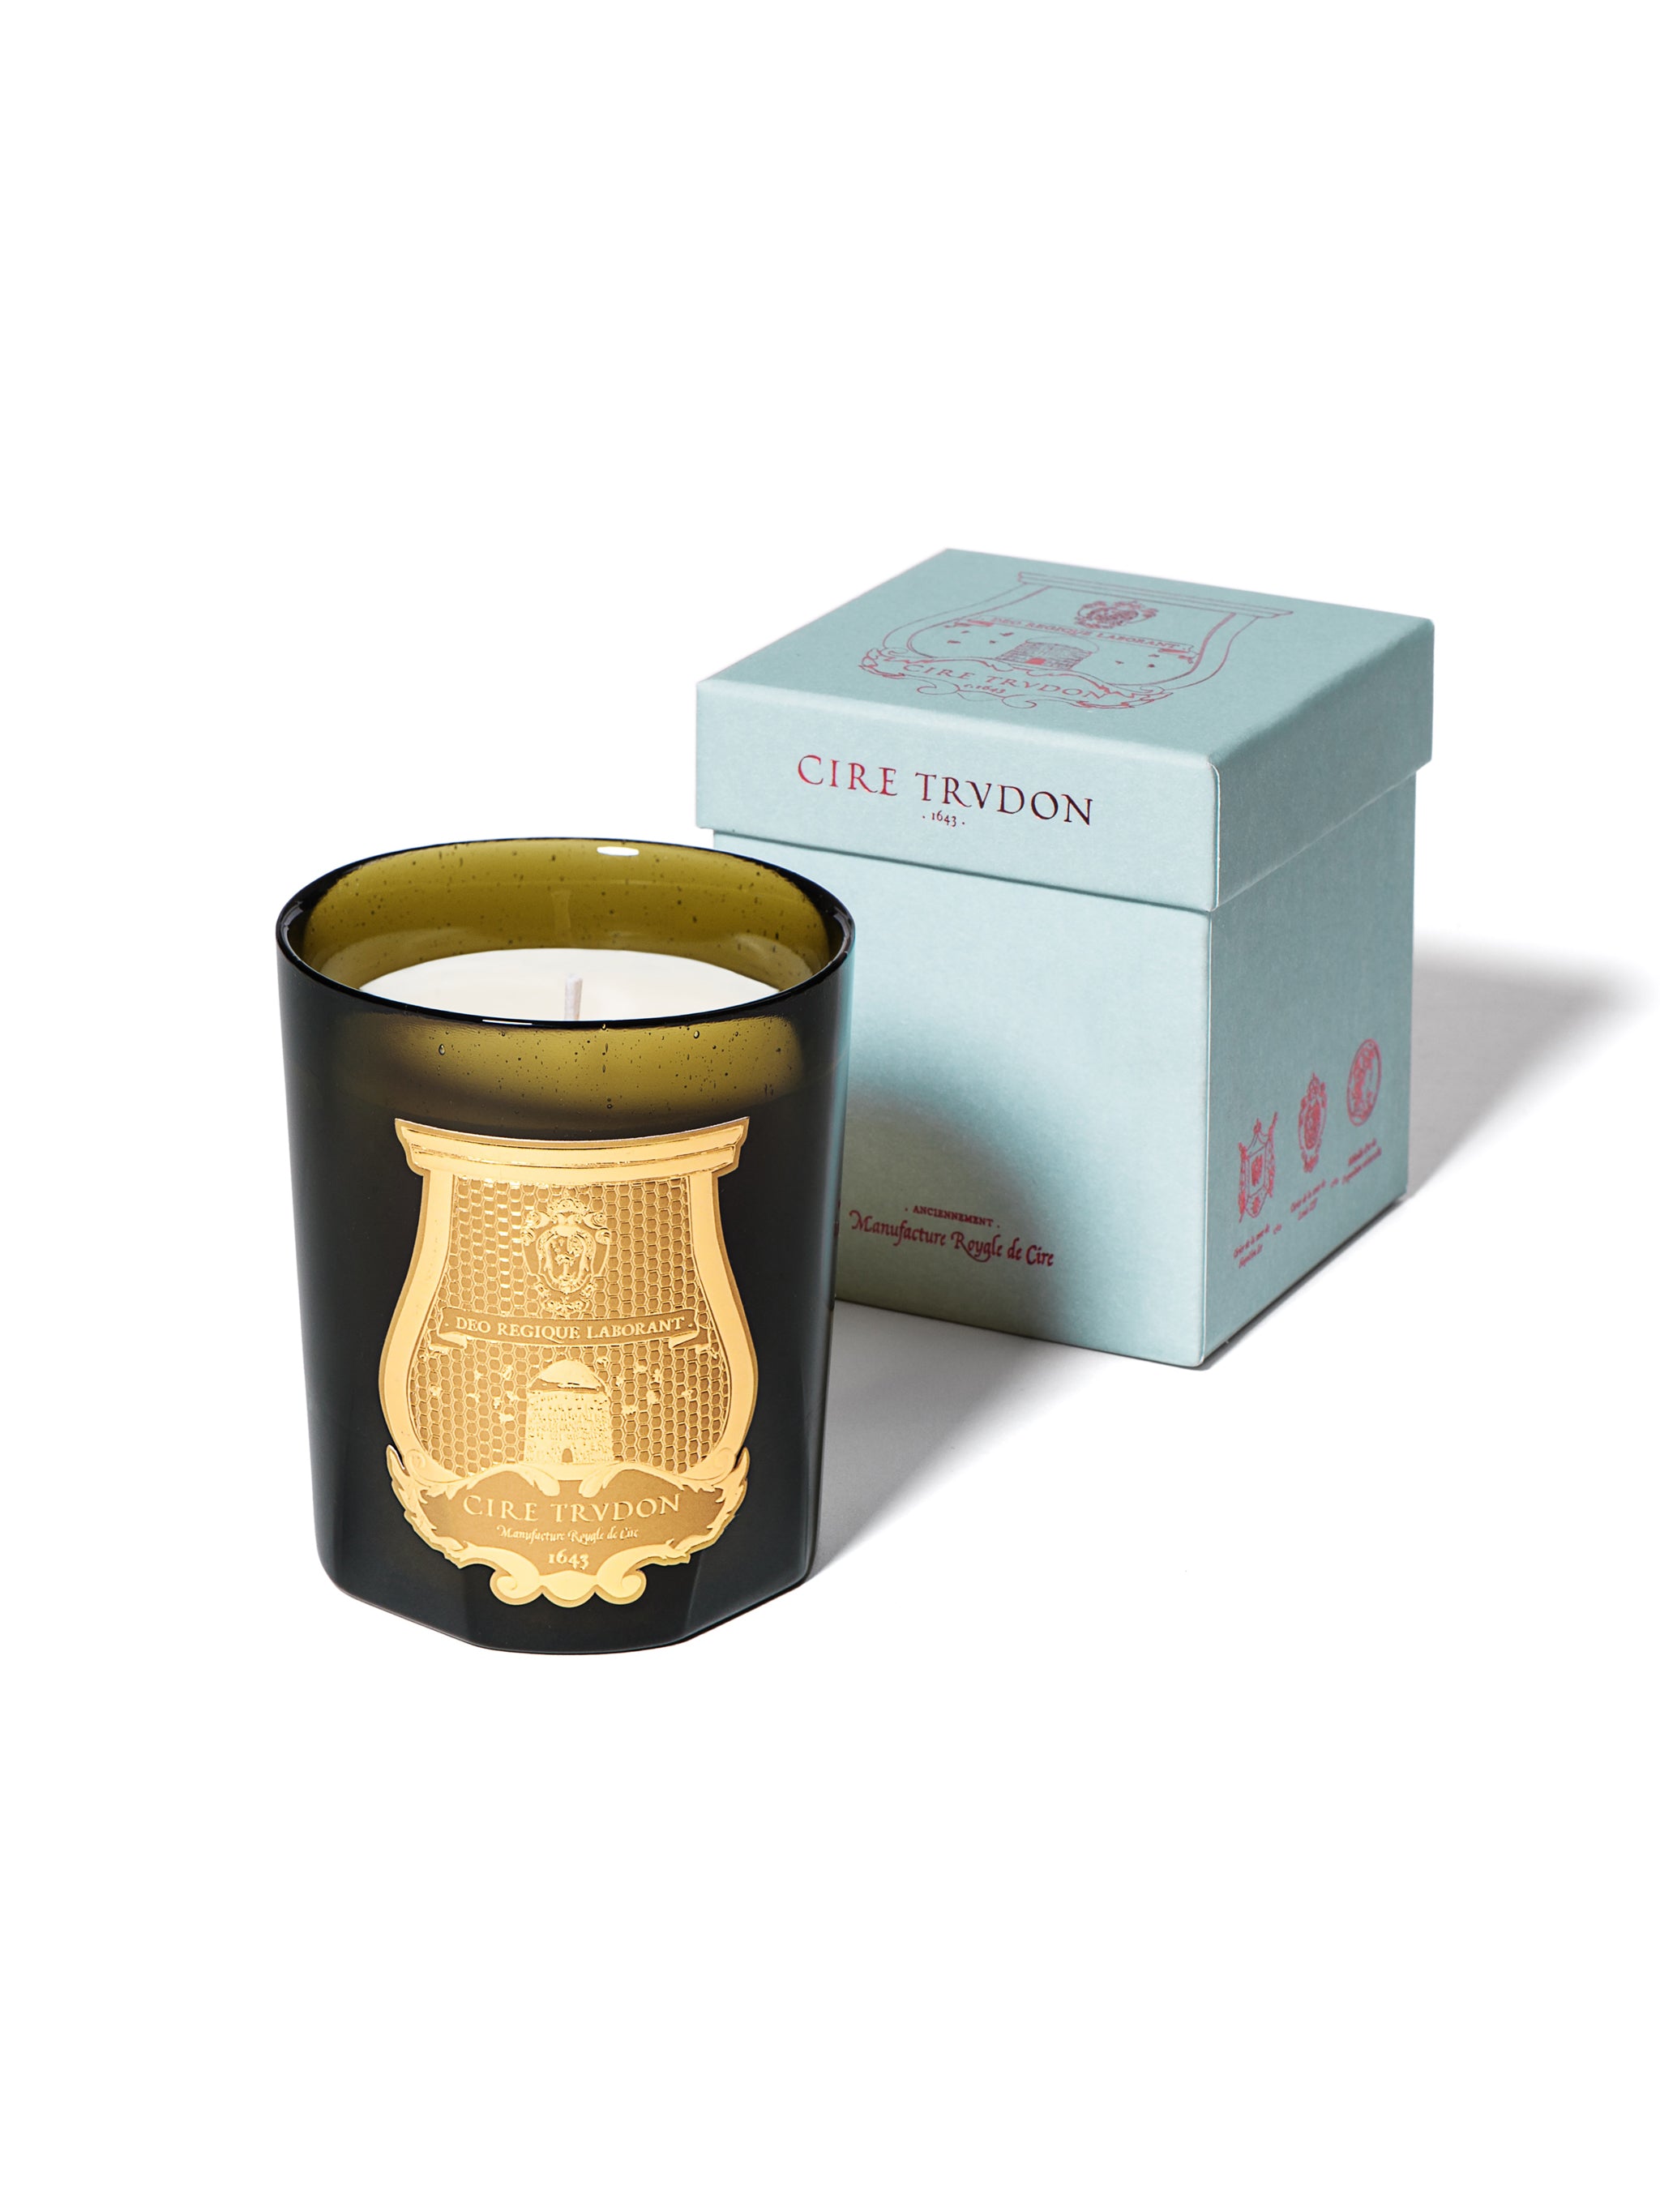 Shop the Trudon Solis Rex Candle at Weston Table